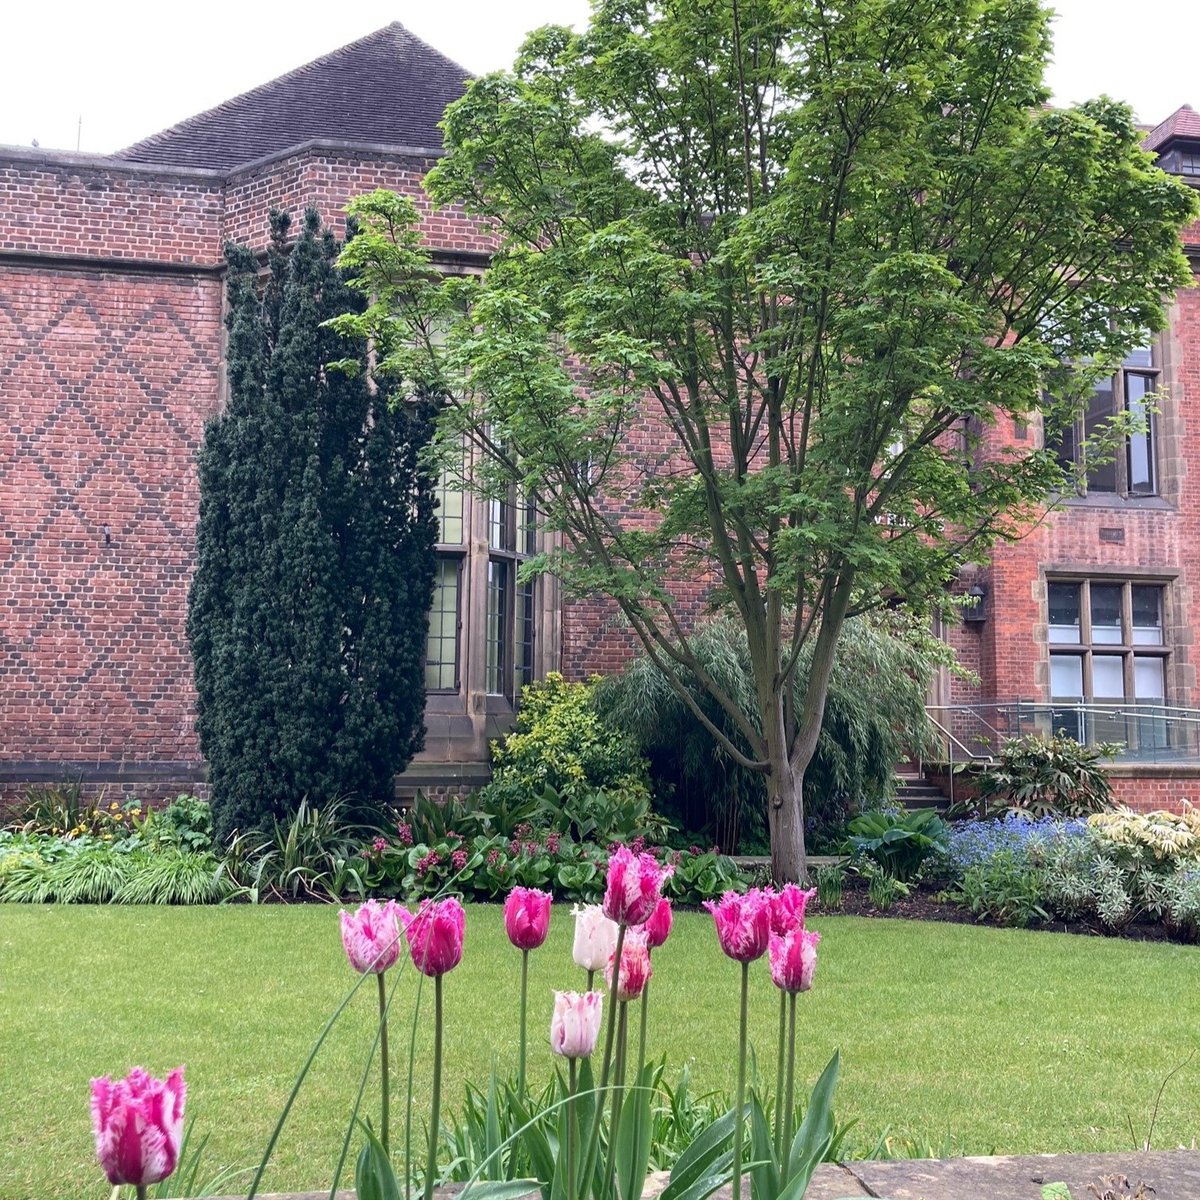 'The Quad looking fabulous in florals' #mynclpics Insta📸 becbobs